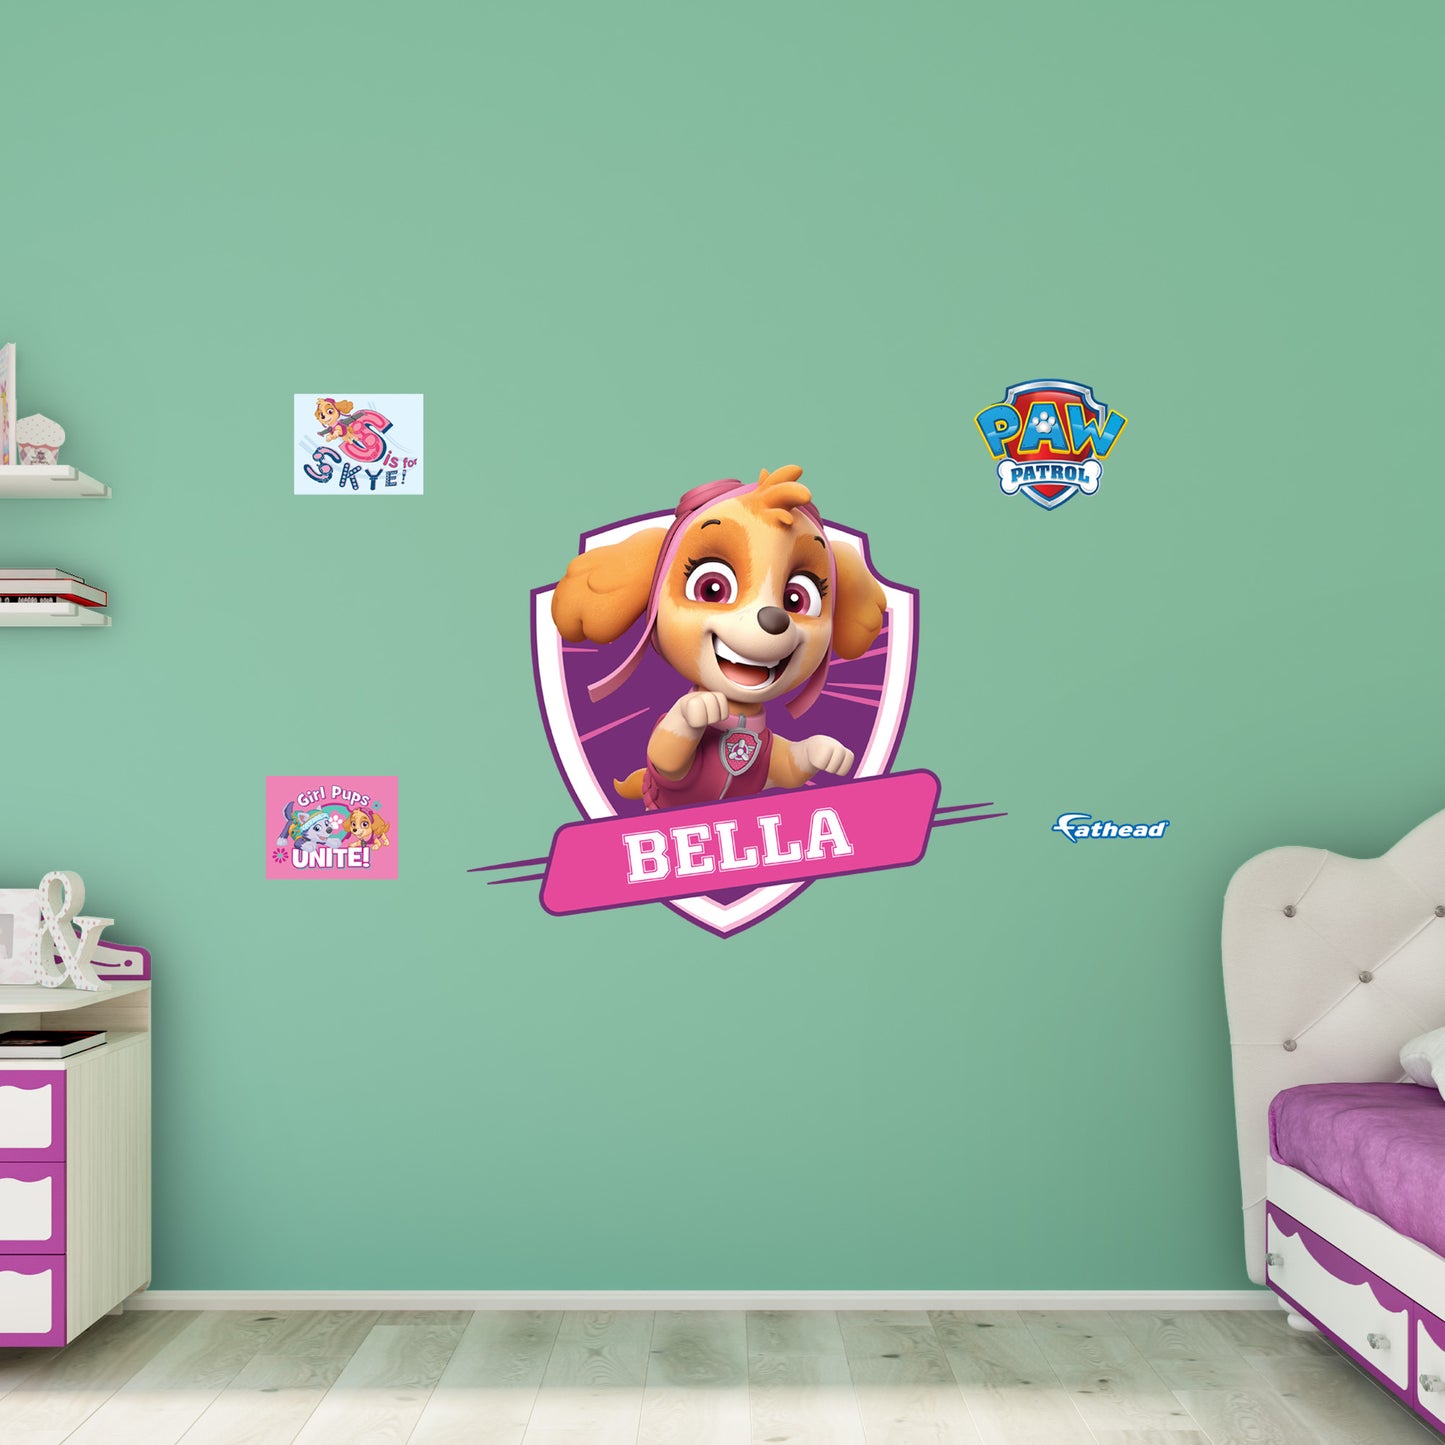 Paw Patrol: Skye Jumping Personalized Name Icon - Officially Licensed Nickelodeon Removable Adhesive Decal